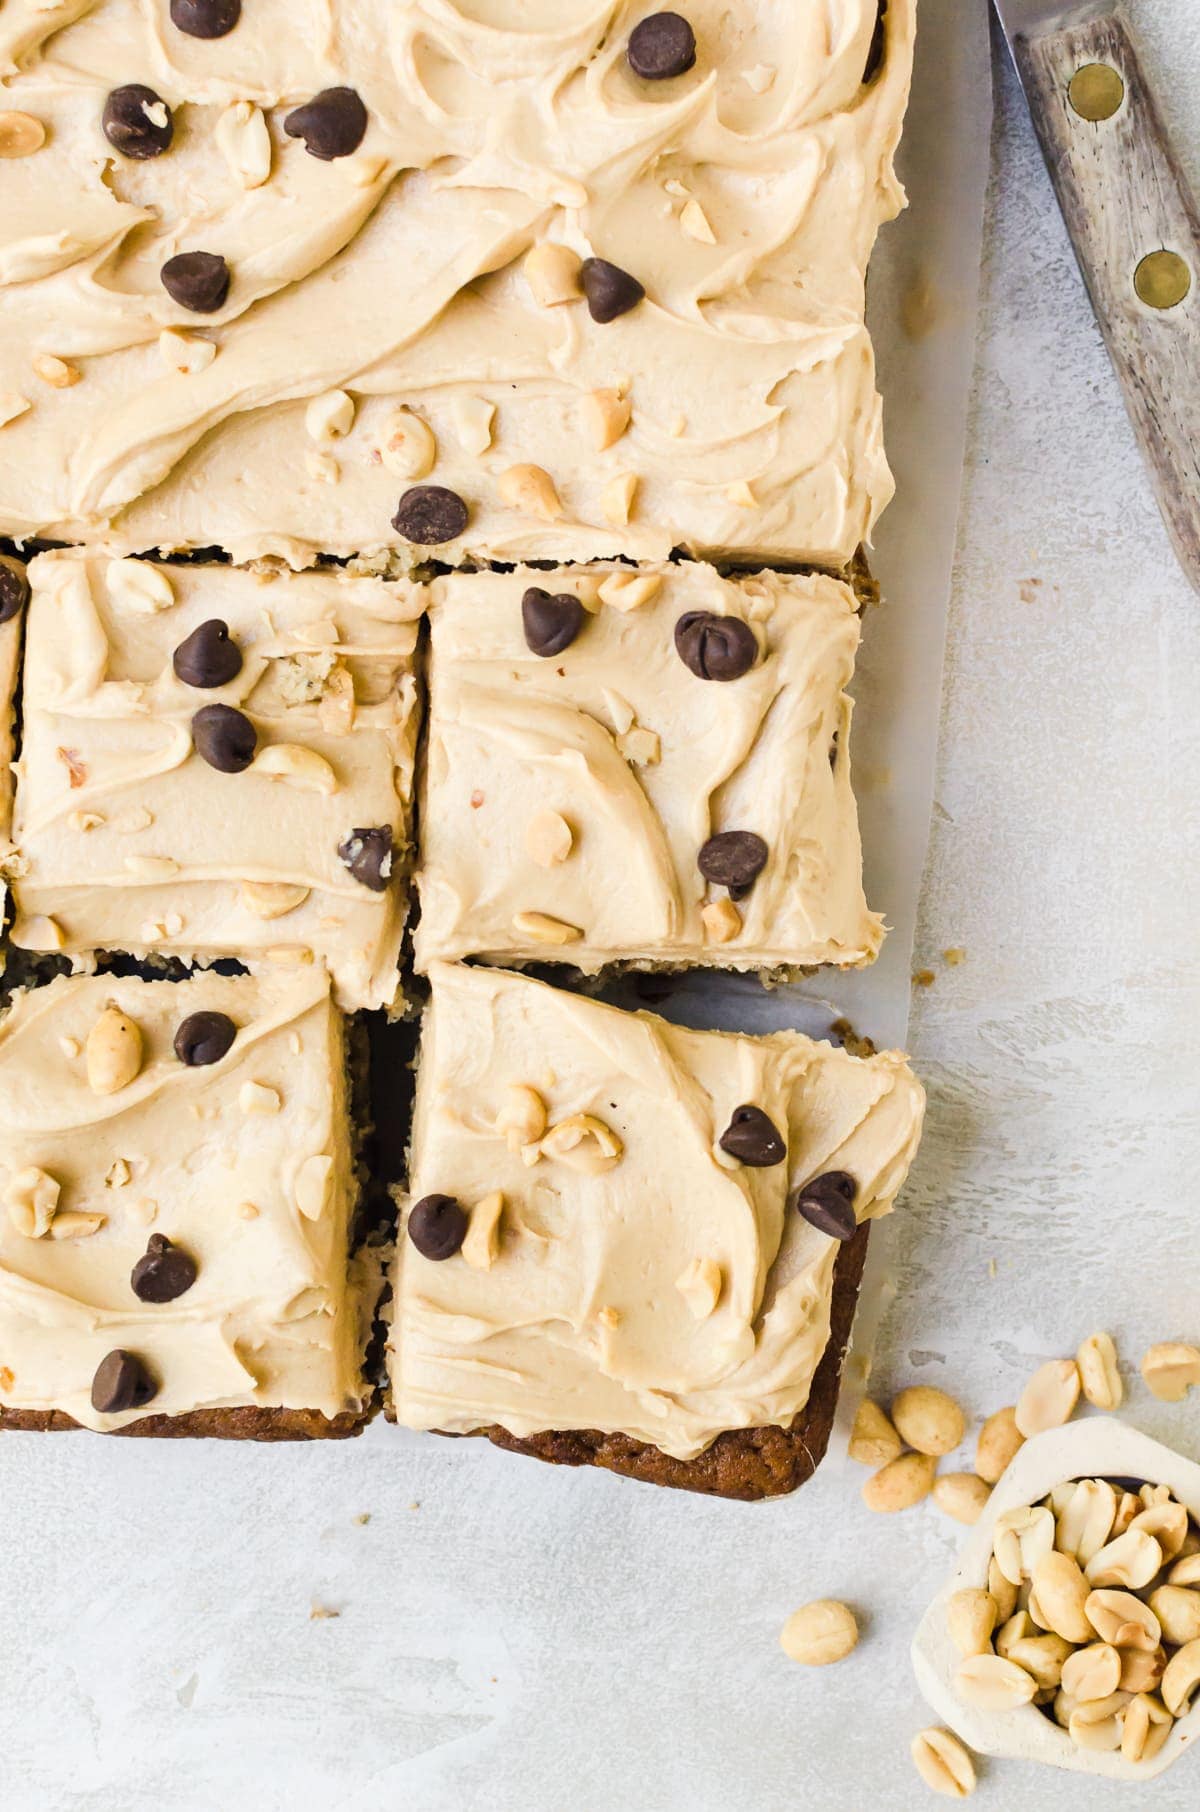 sliced banana sheet cake with peanut butter frosting